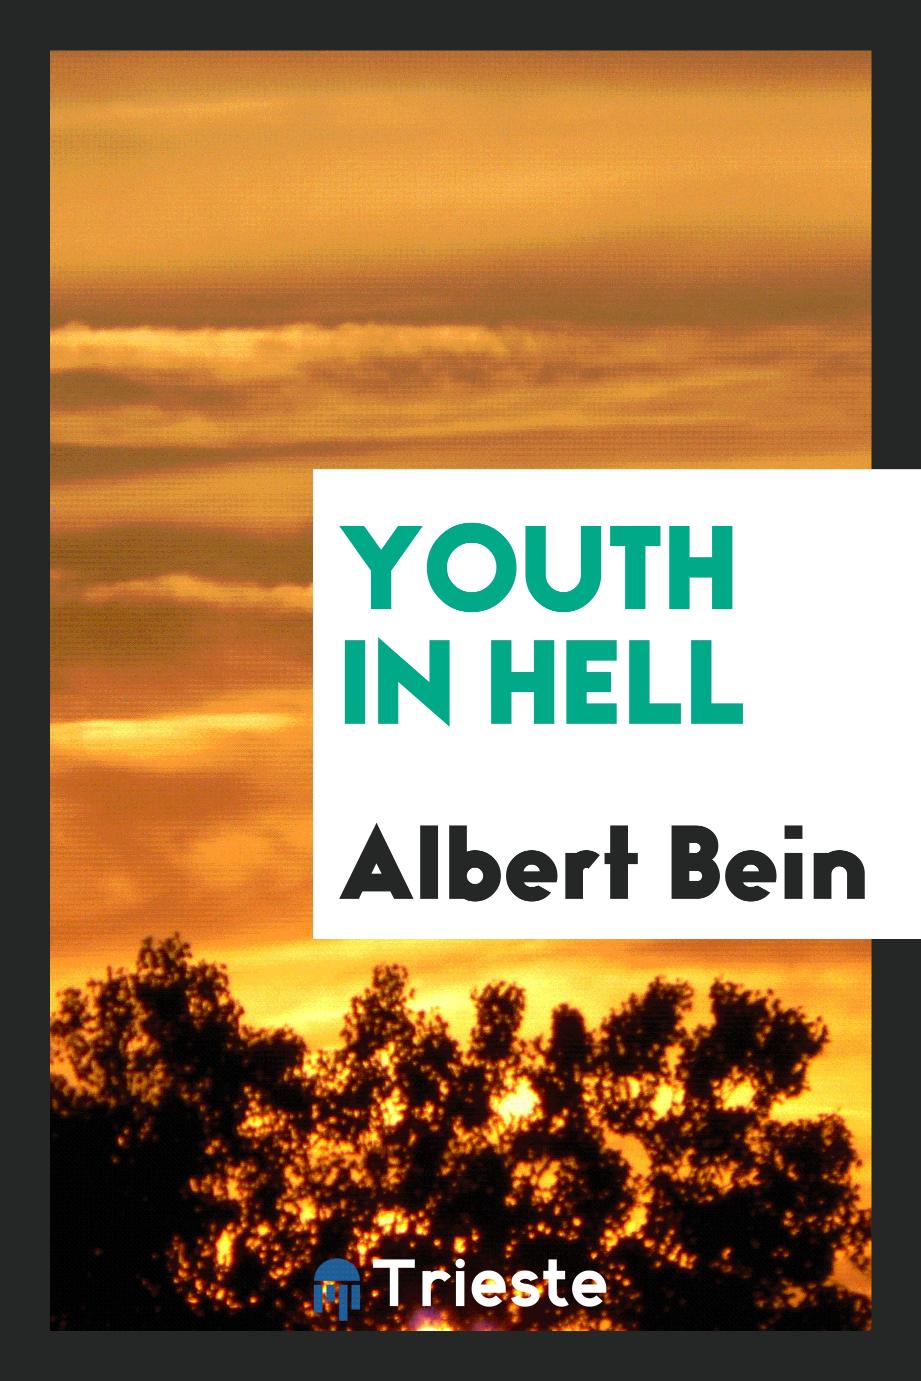 Youth in hell